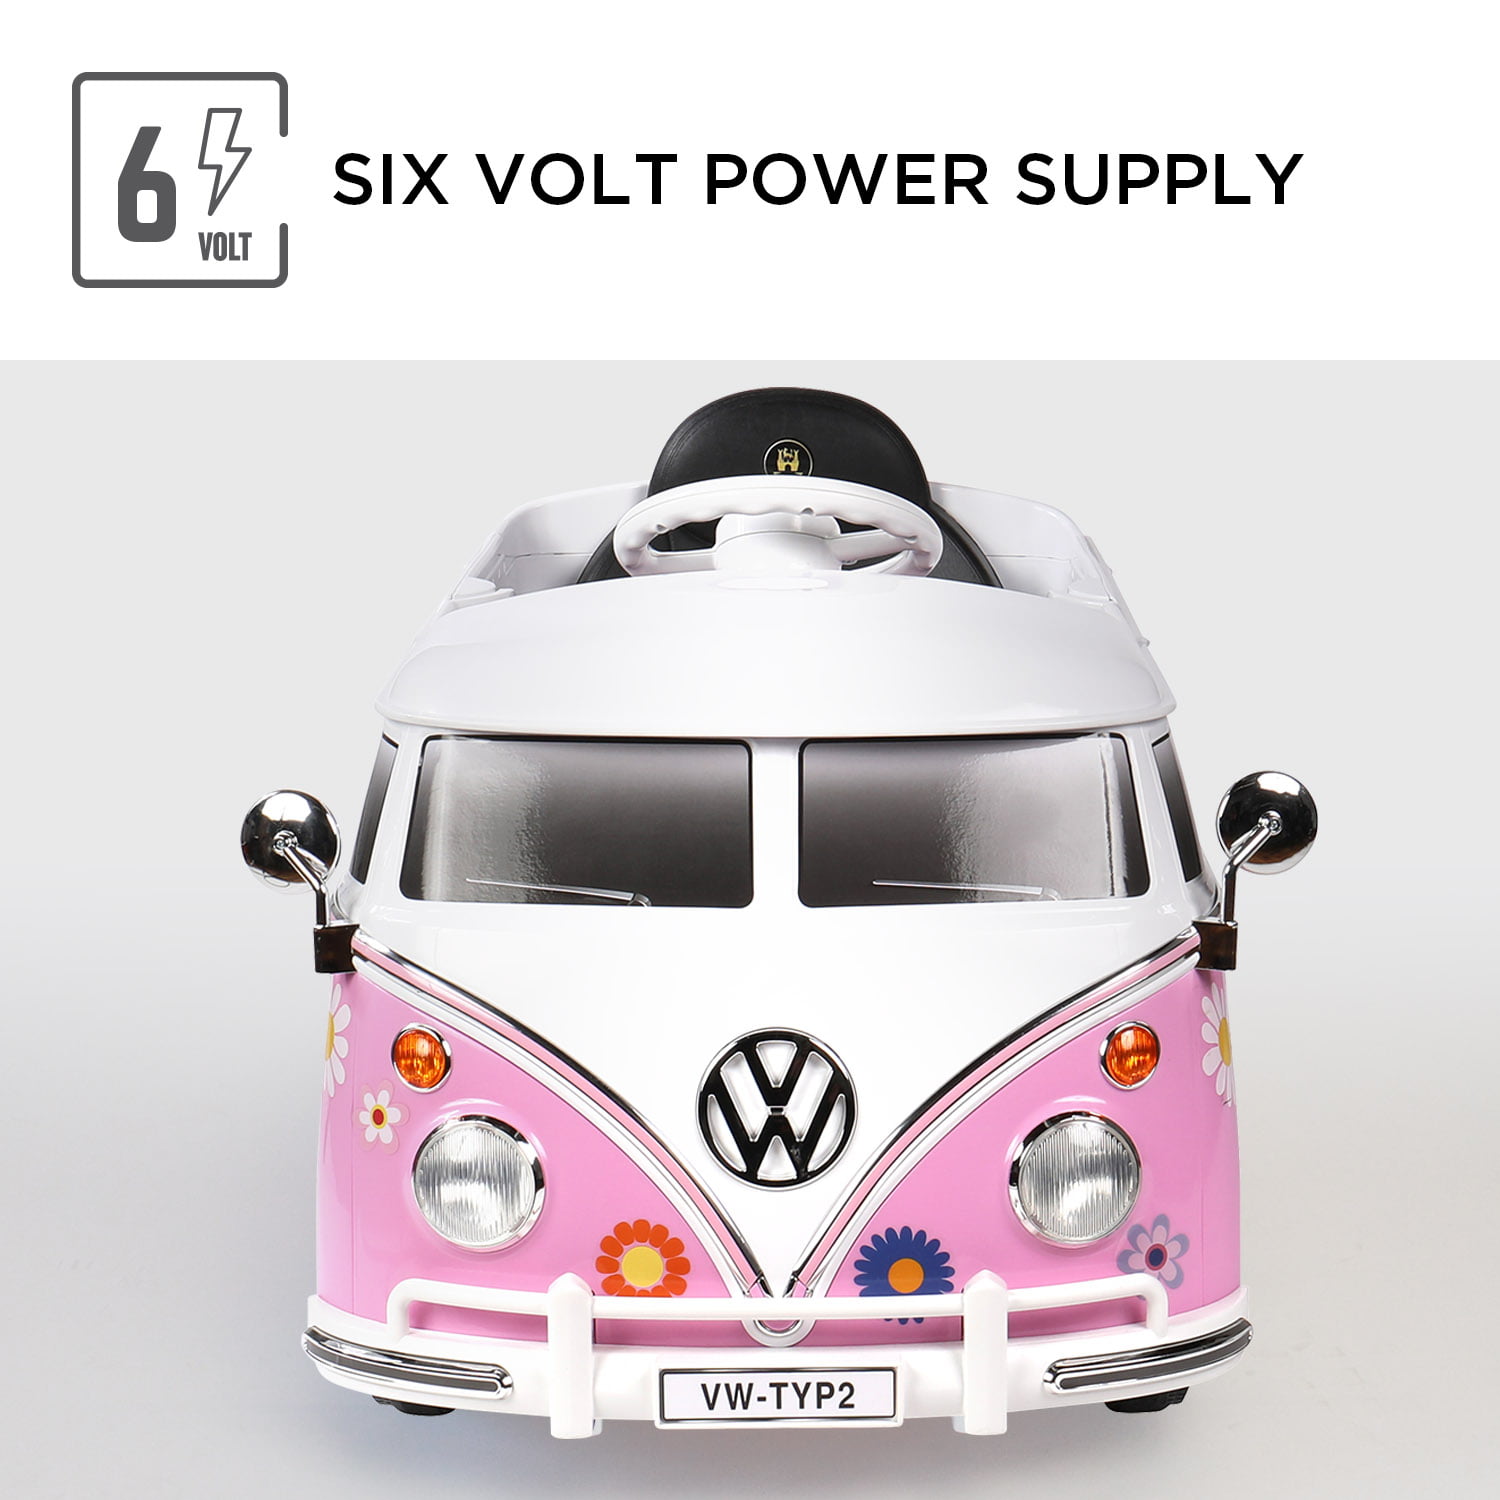 W487ACROB for sale online Rollplay 6V VW Battery Powered Bus Ride On Toy